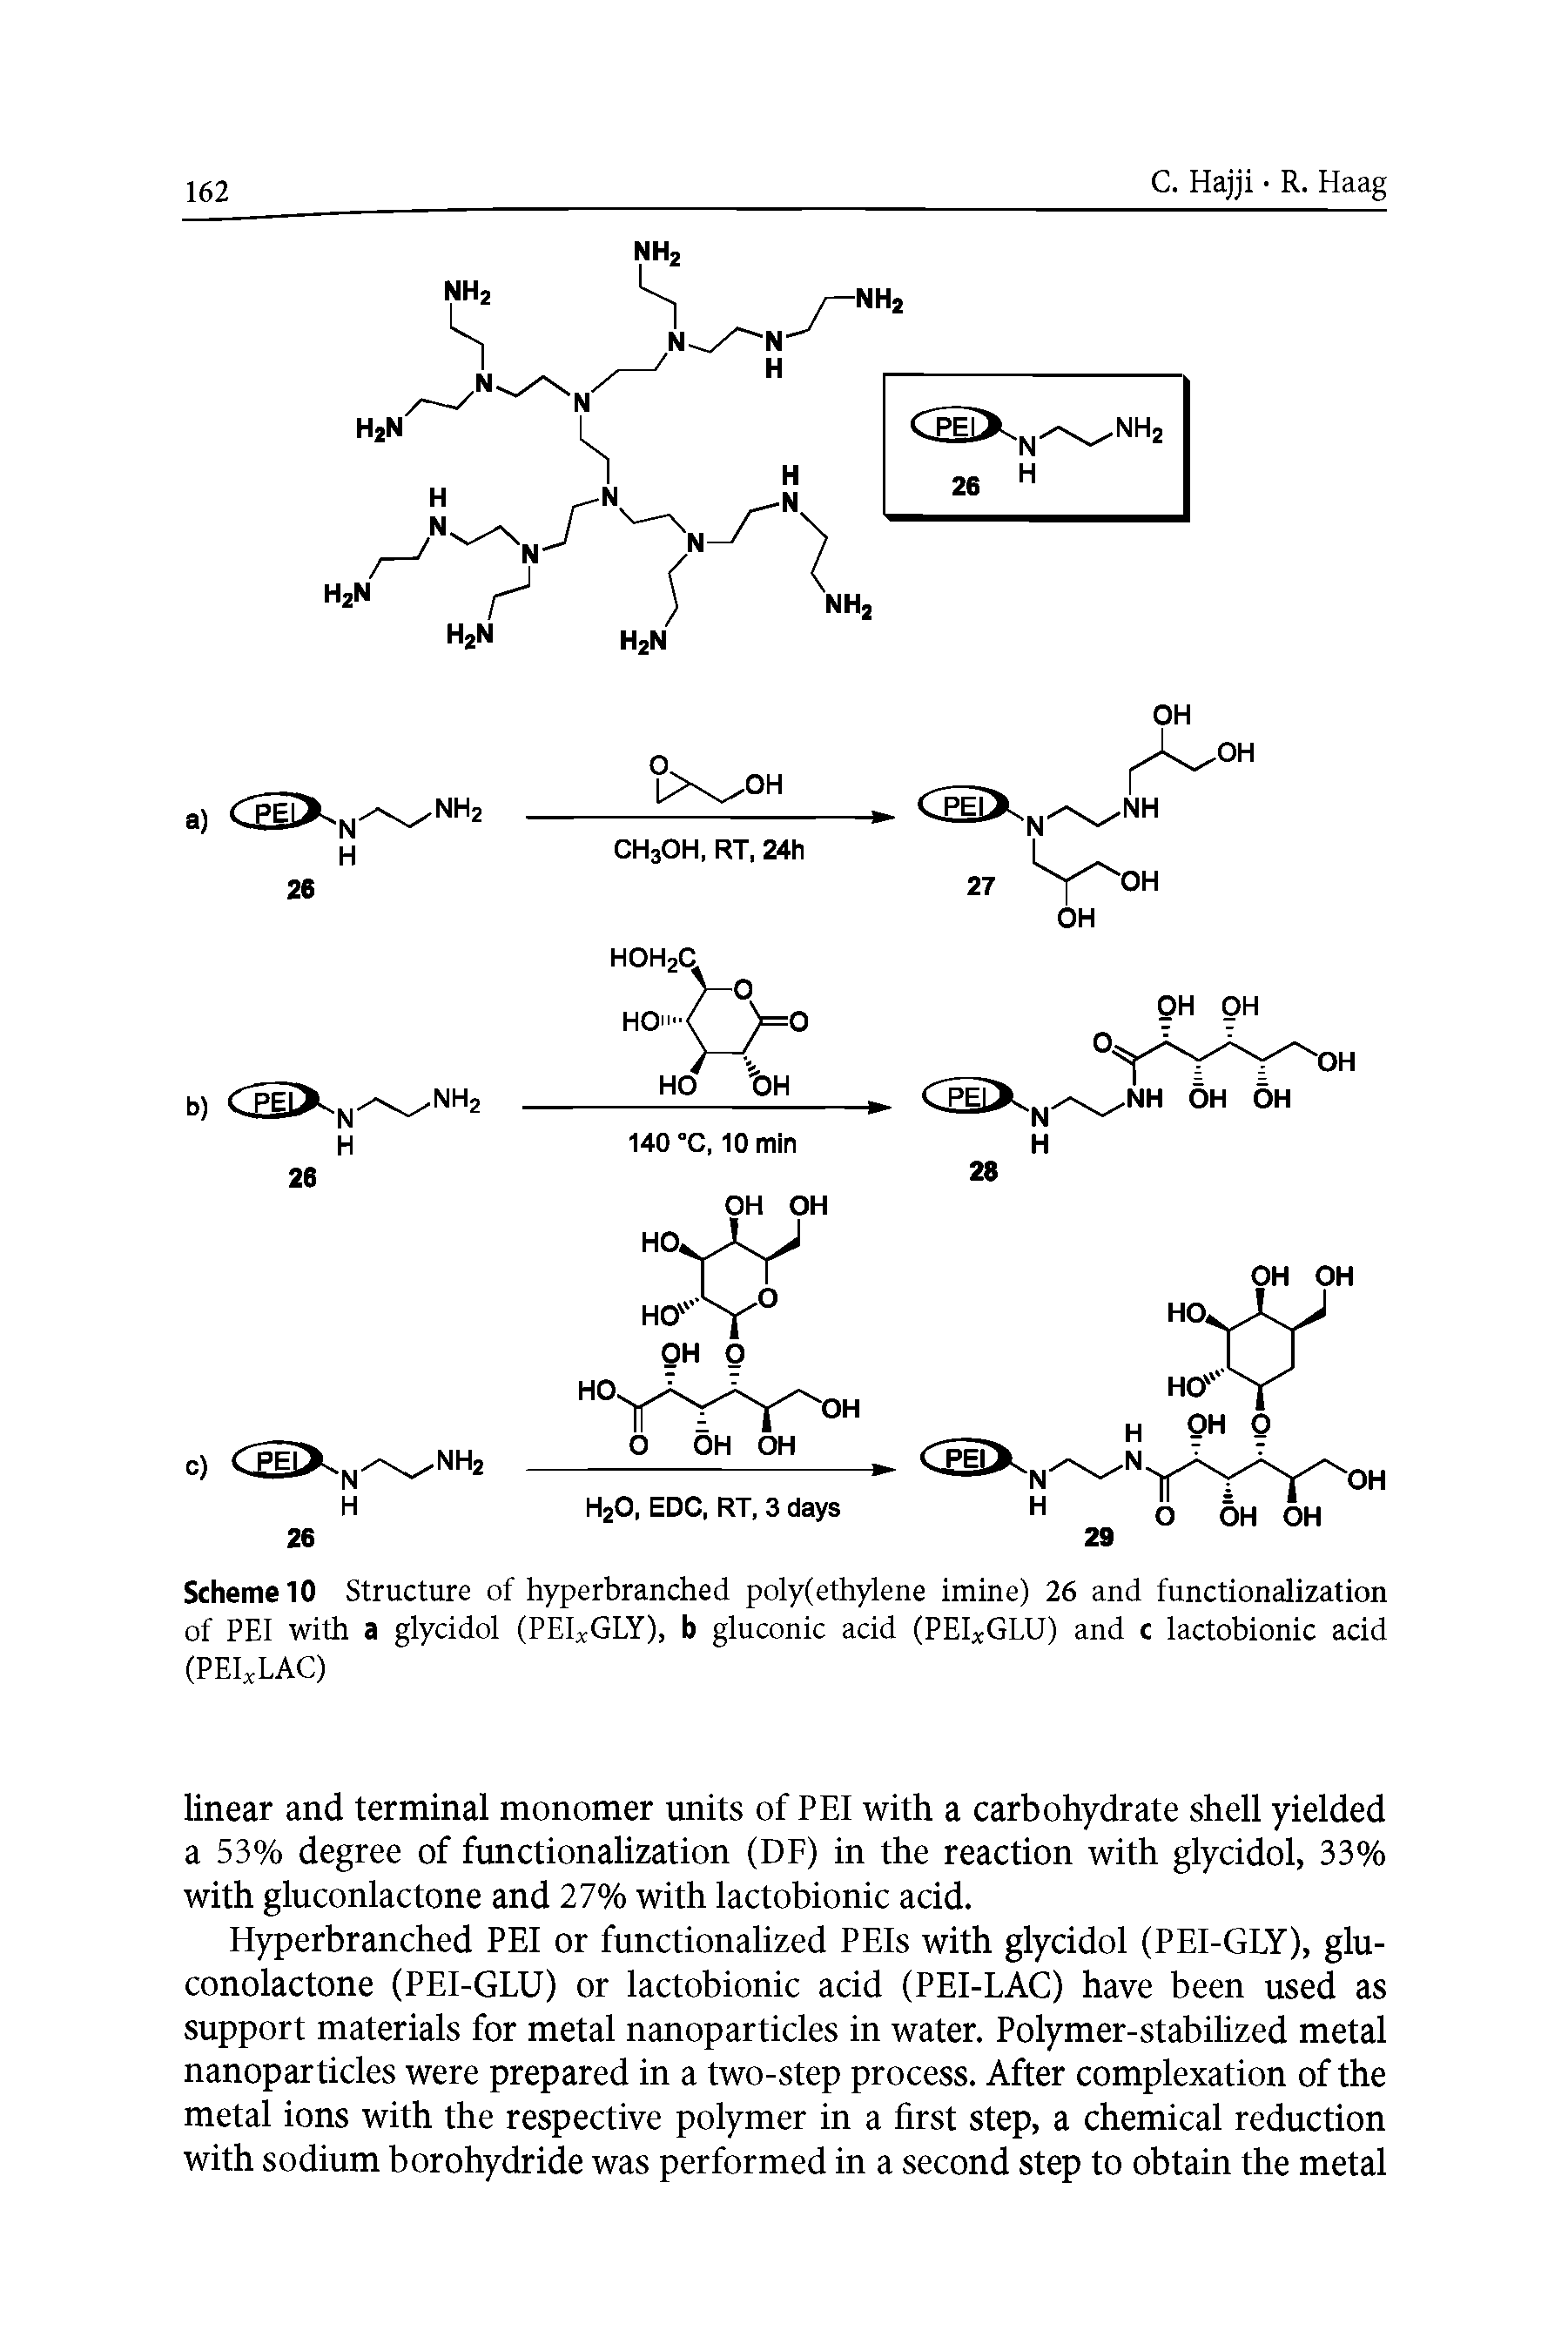 Scheme 10 Structure of hyperbranched poly(ethylene imine) 26 and functionalization of PEI with a glycidol (PEIXGLY), b gluconic acid (PEI GLU) and c lactobionic acid (PEIXLAC)...